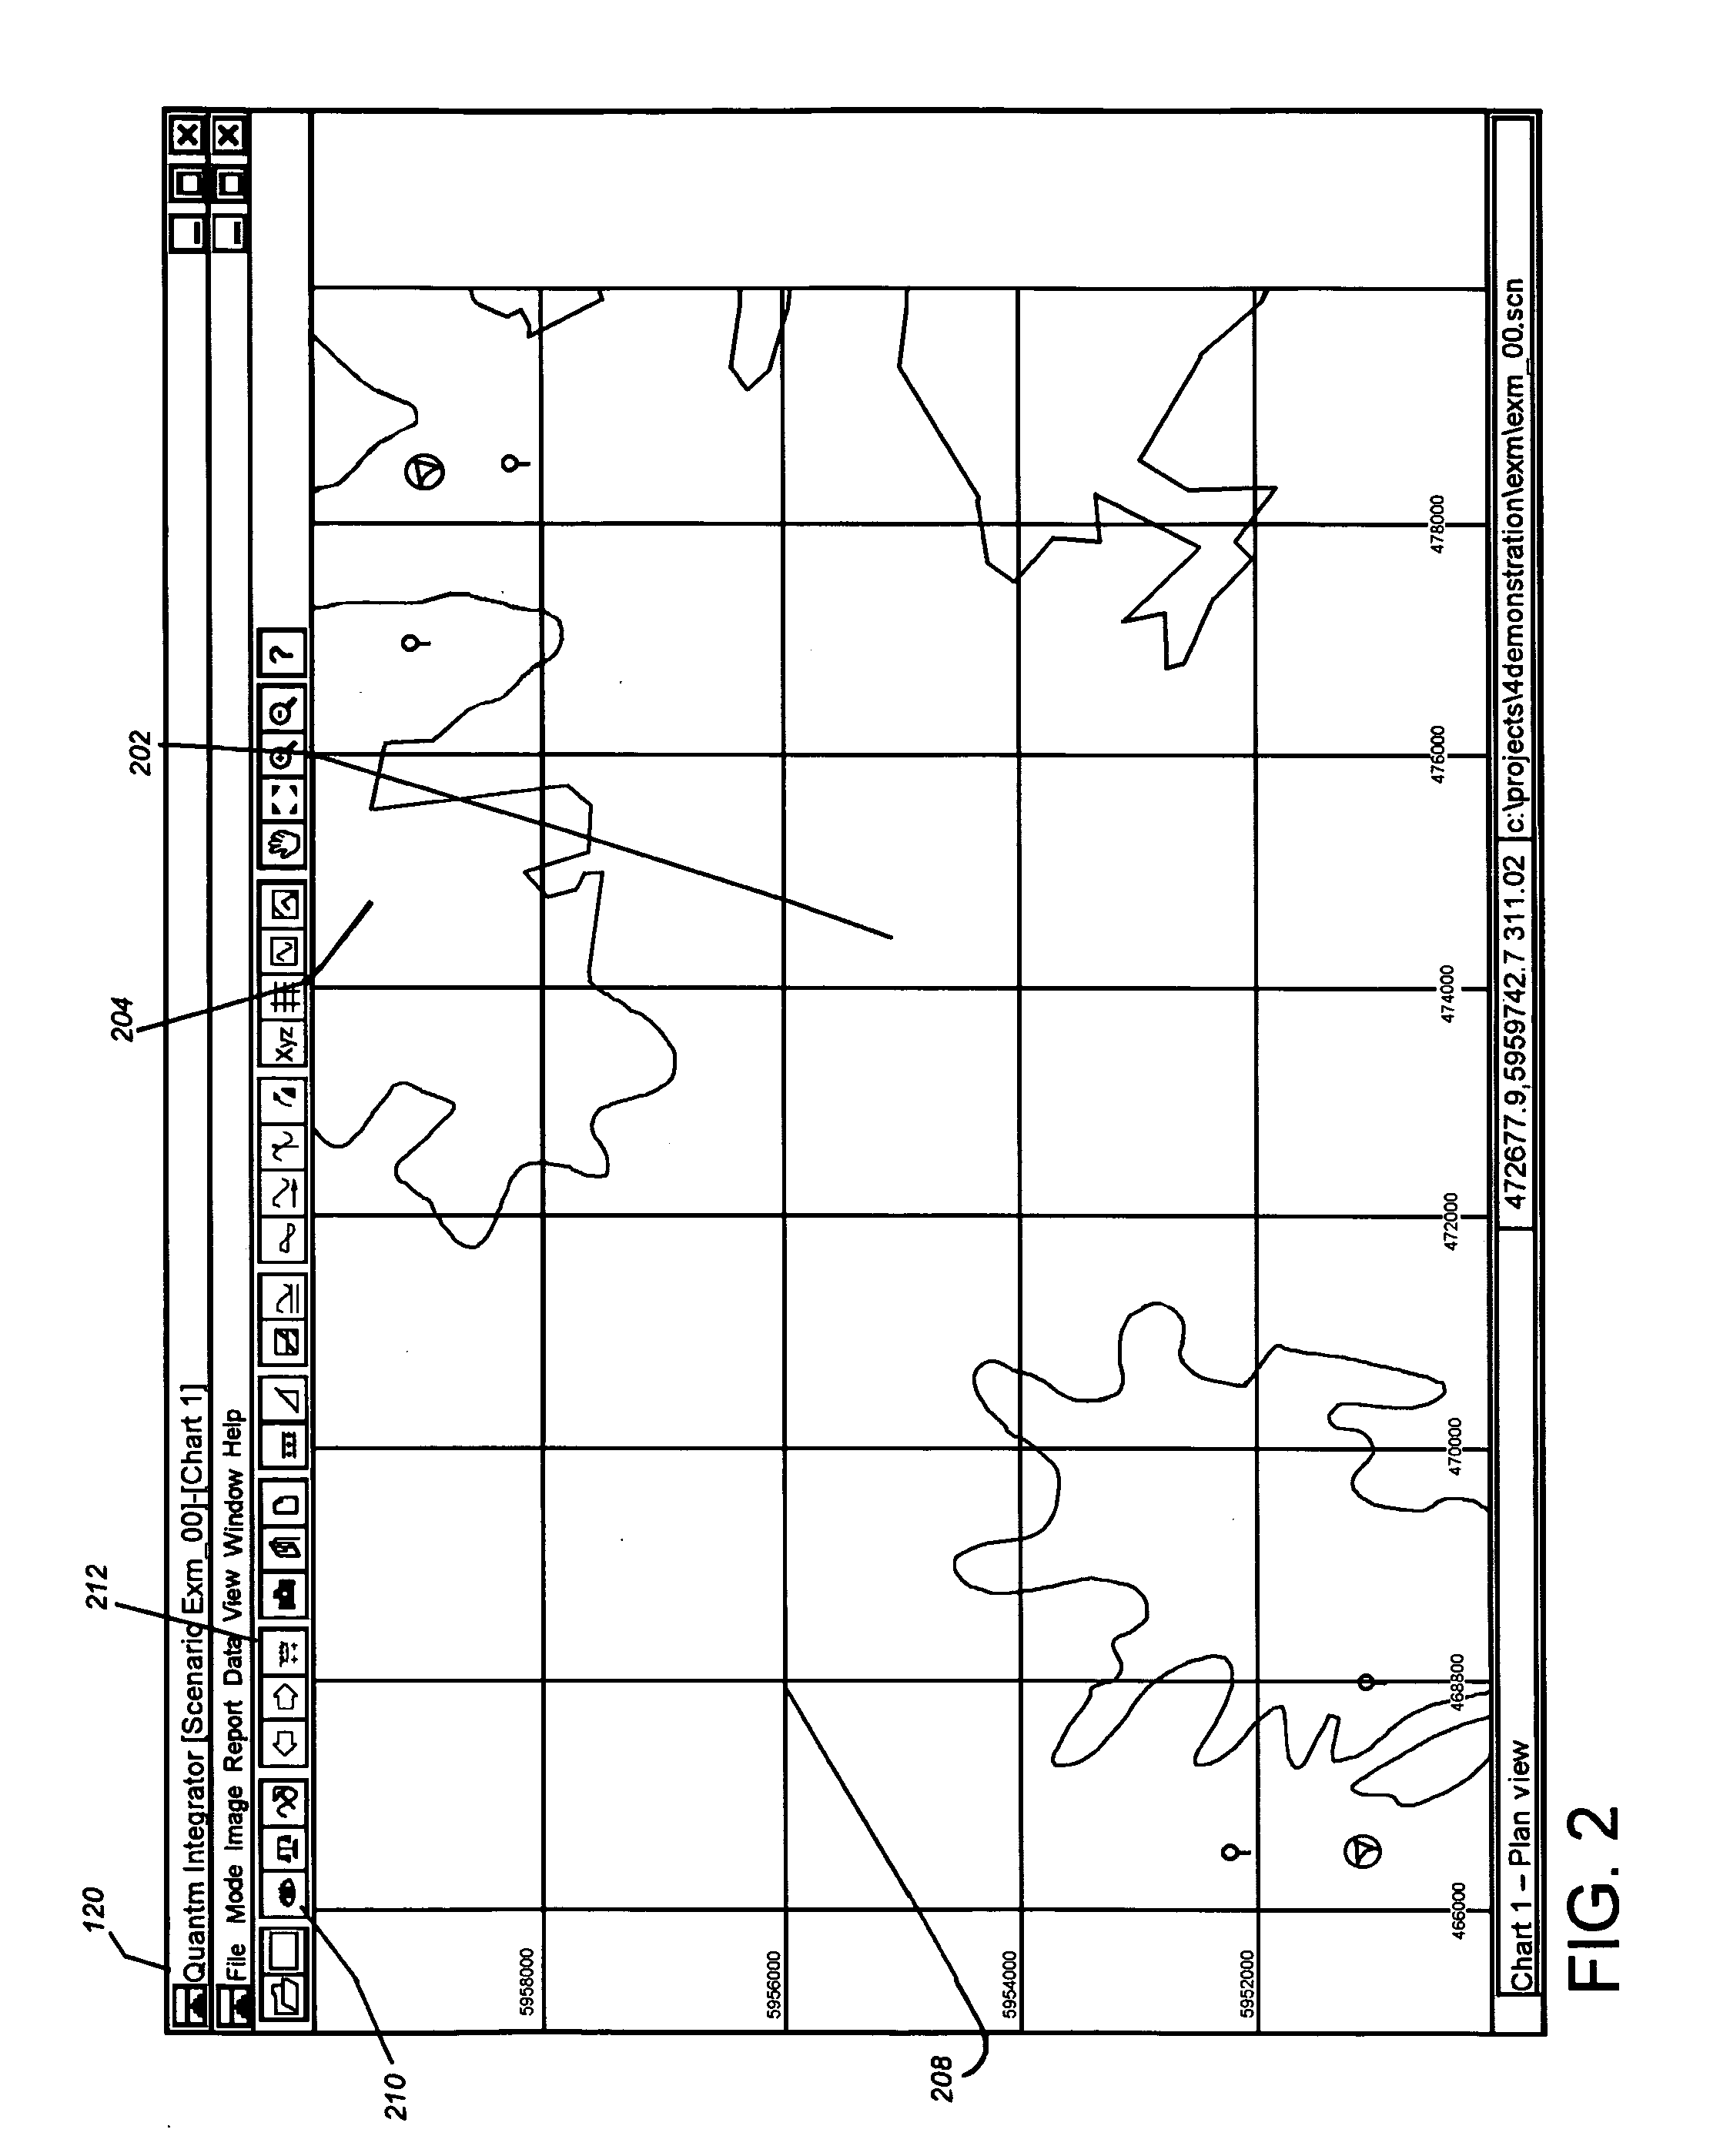 Path determination system for transport system